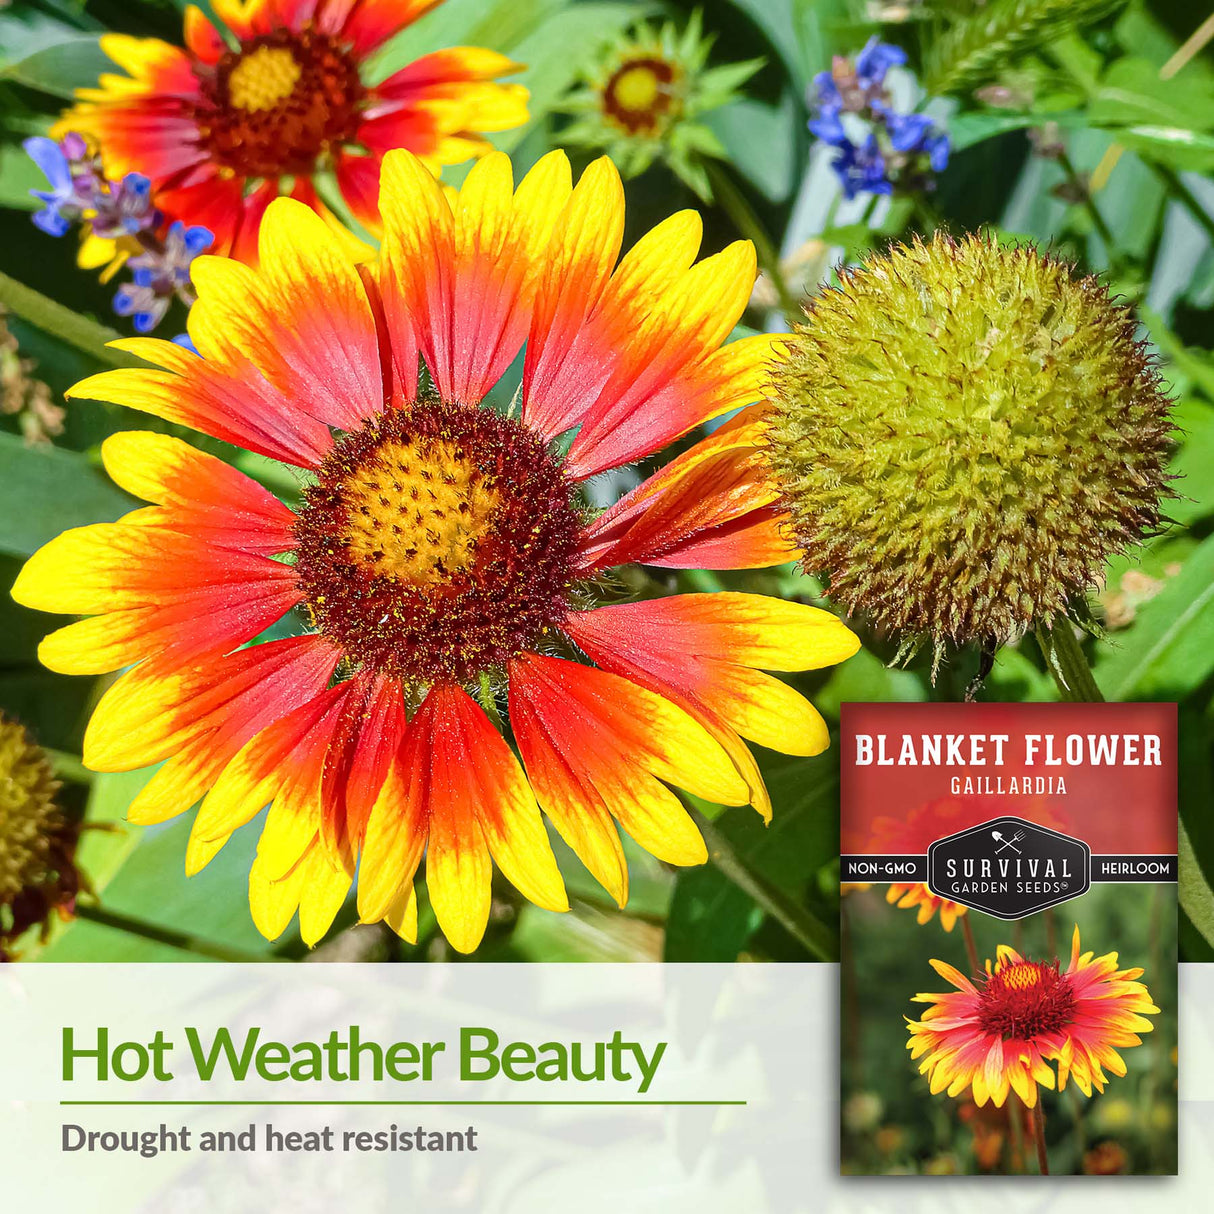 Blanket Flower is drought and heat resisstant